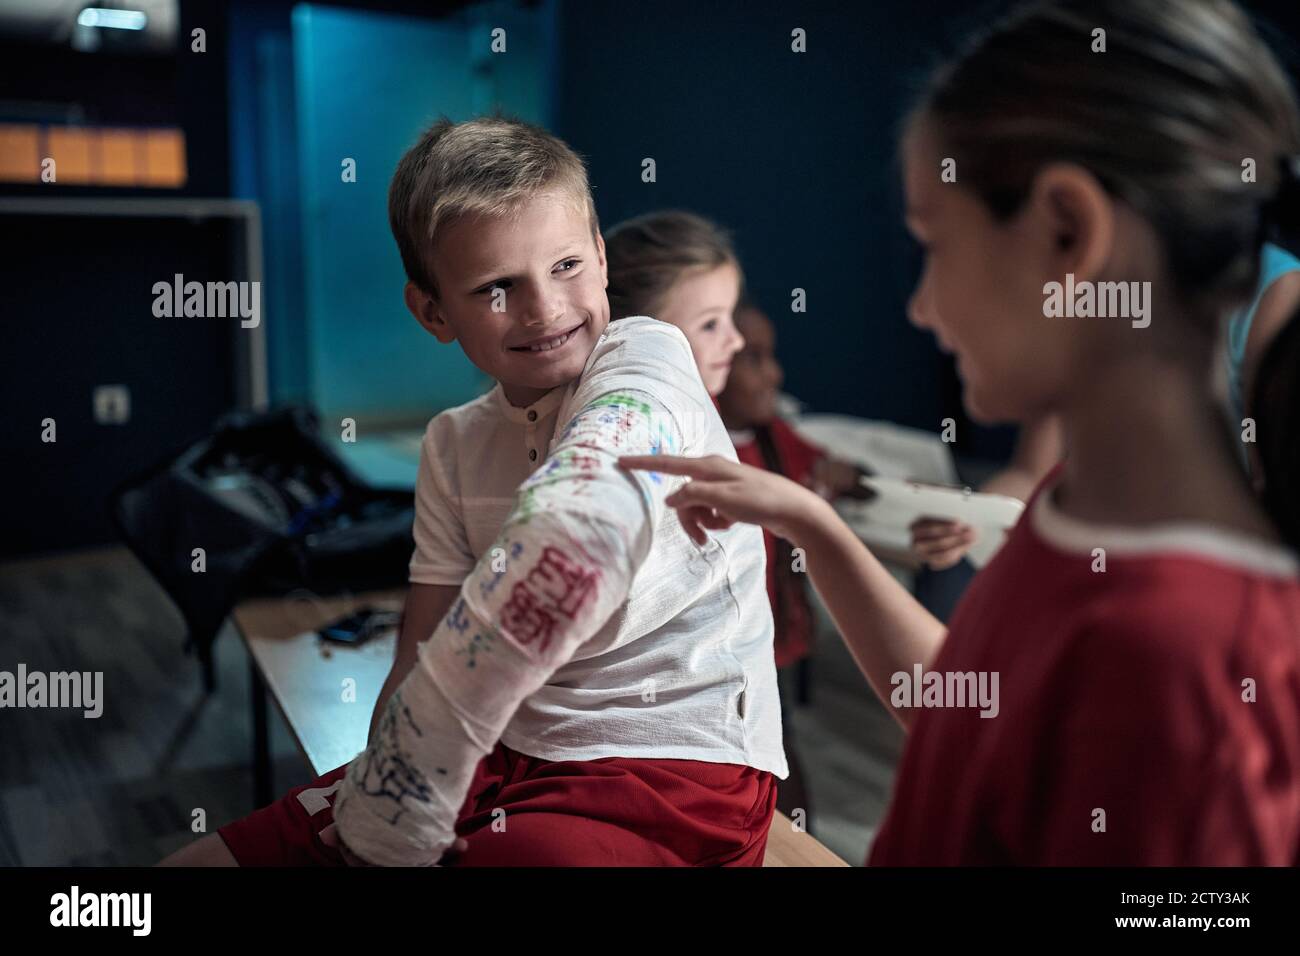 Injured a little soccer player showing his broken arm to team mates in a locker room Stock Photo